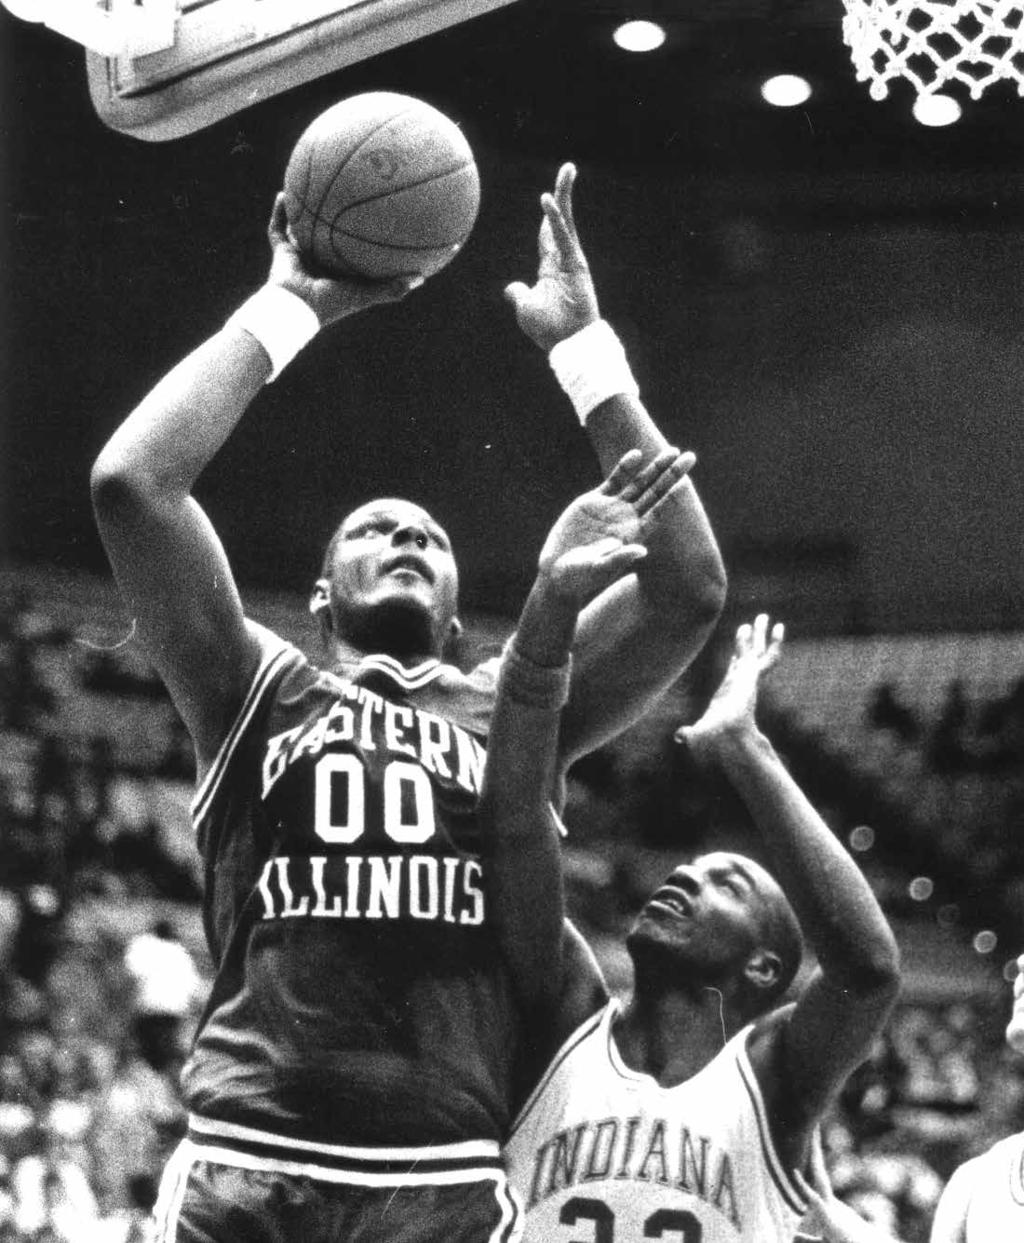 EASTERN ILLINOIS BASKETBALL LEGENDS NBA ALL-STAR KEVIN DUCKWORTH Former Eastern Illinois standout Kevin Duckworth ended an 11 year career in the National Basketball Association playing a fiveyear